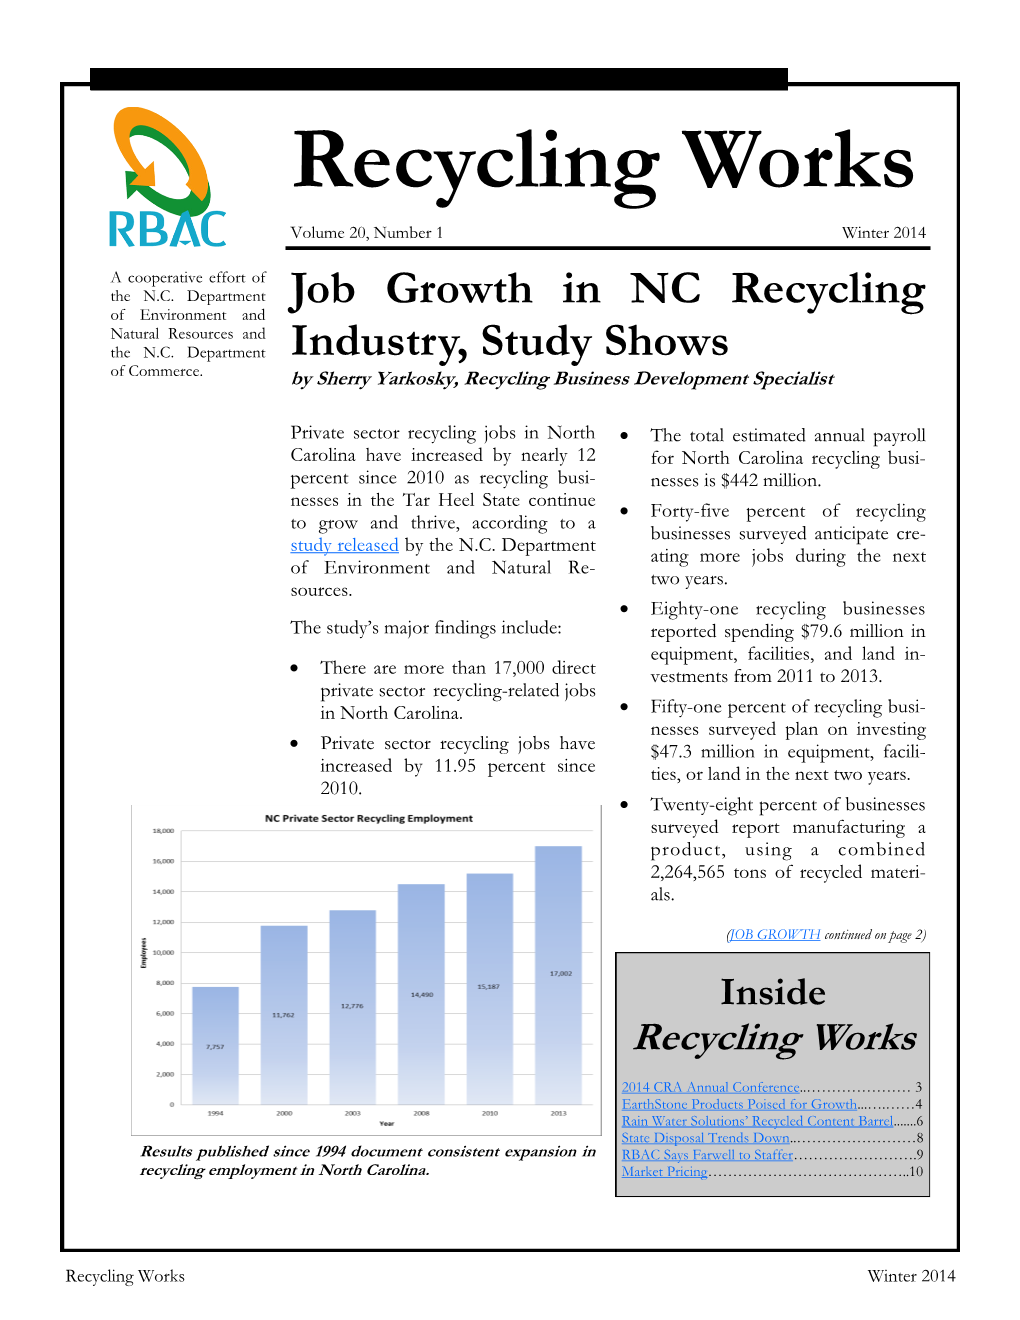 Recycling Works Volume 20, Number 1 Winter 2014